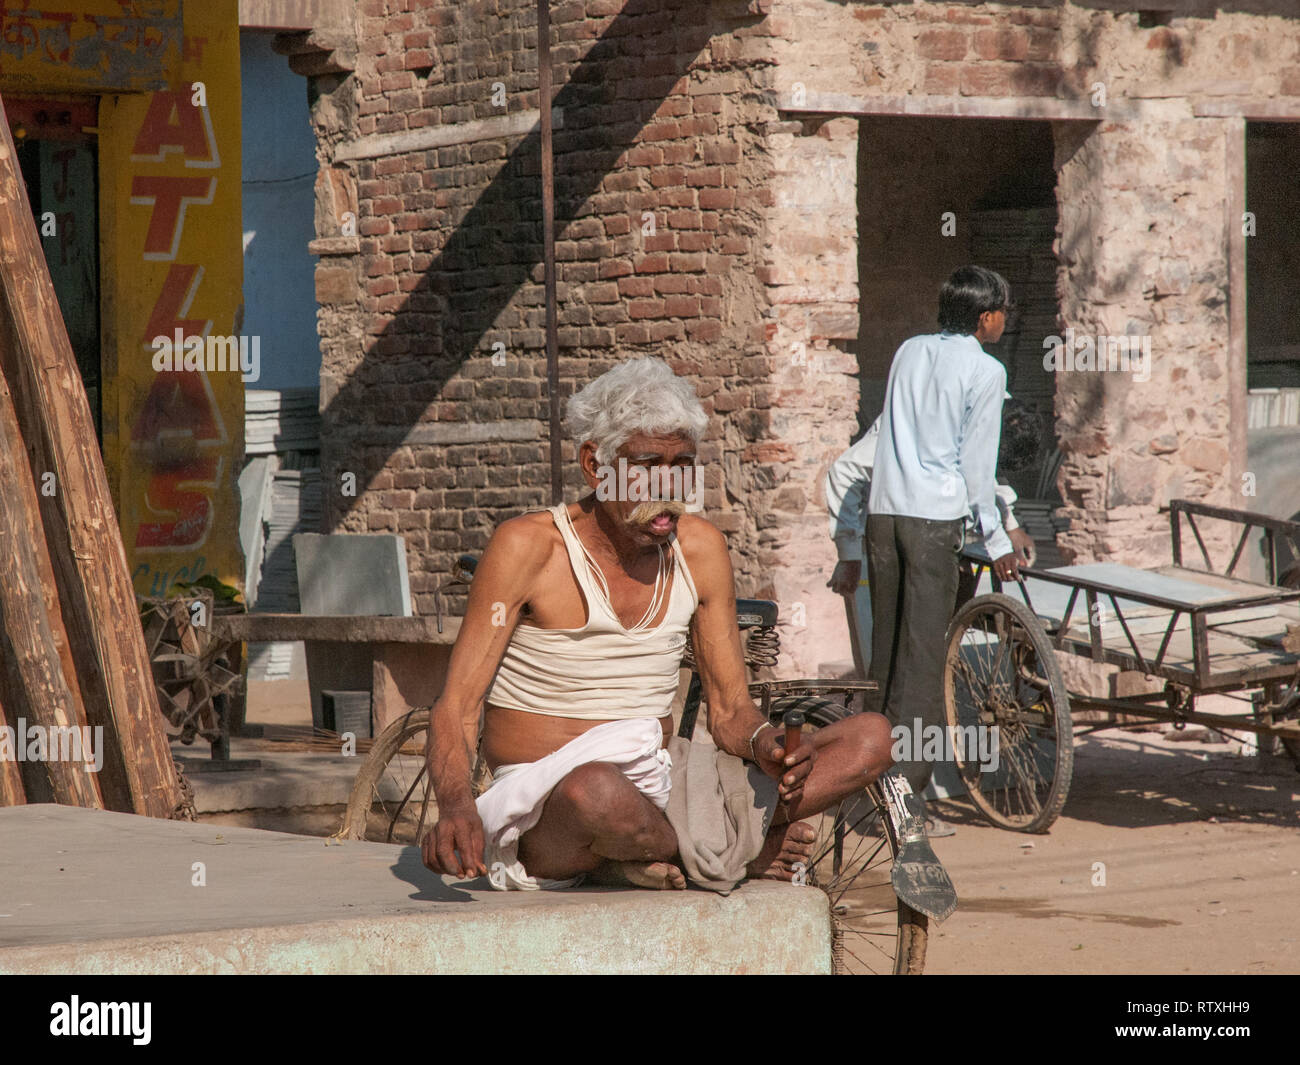 Village life in Rajasthan, India. Rajasthan is the largest stae in India by area. Stock Photo